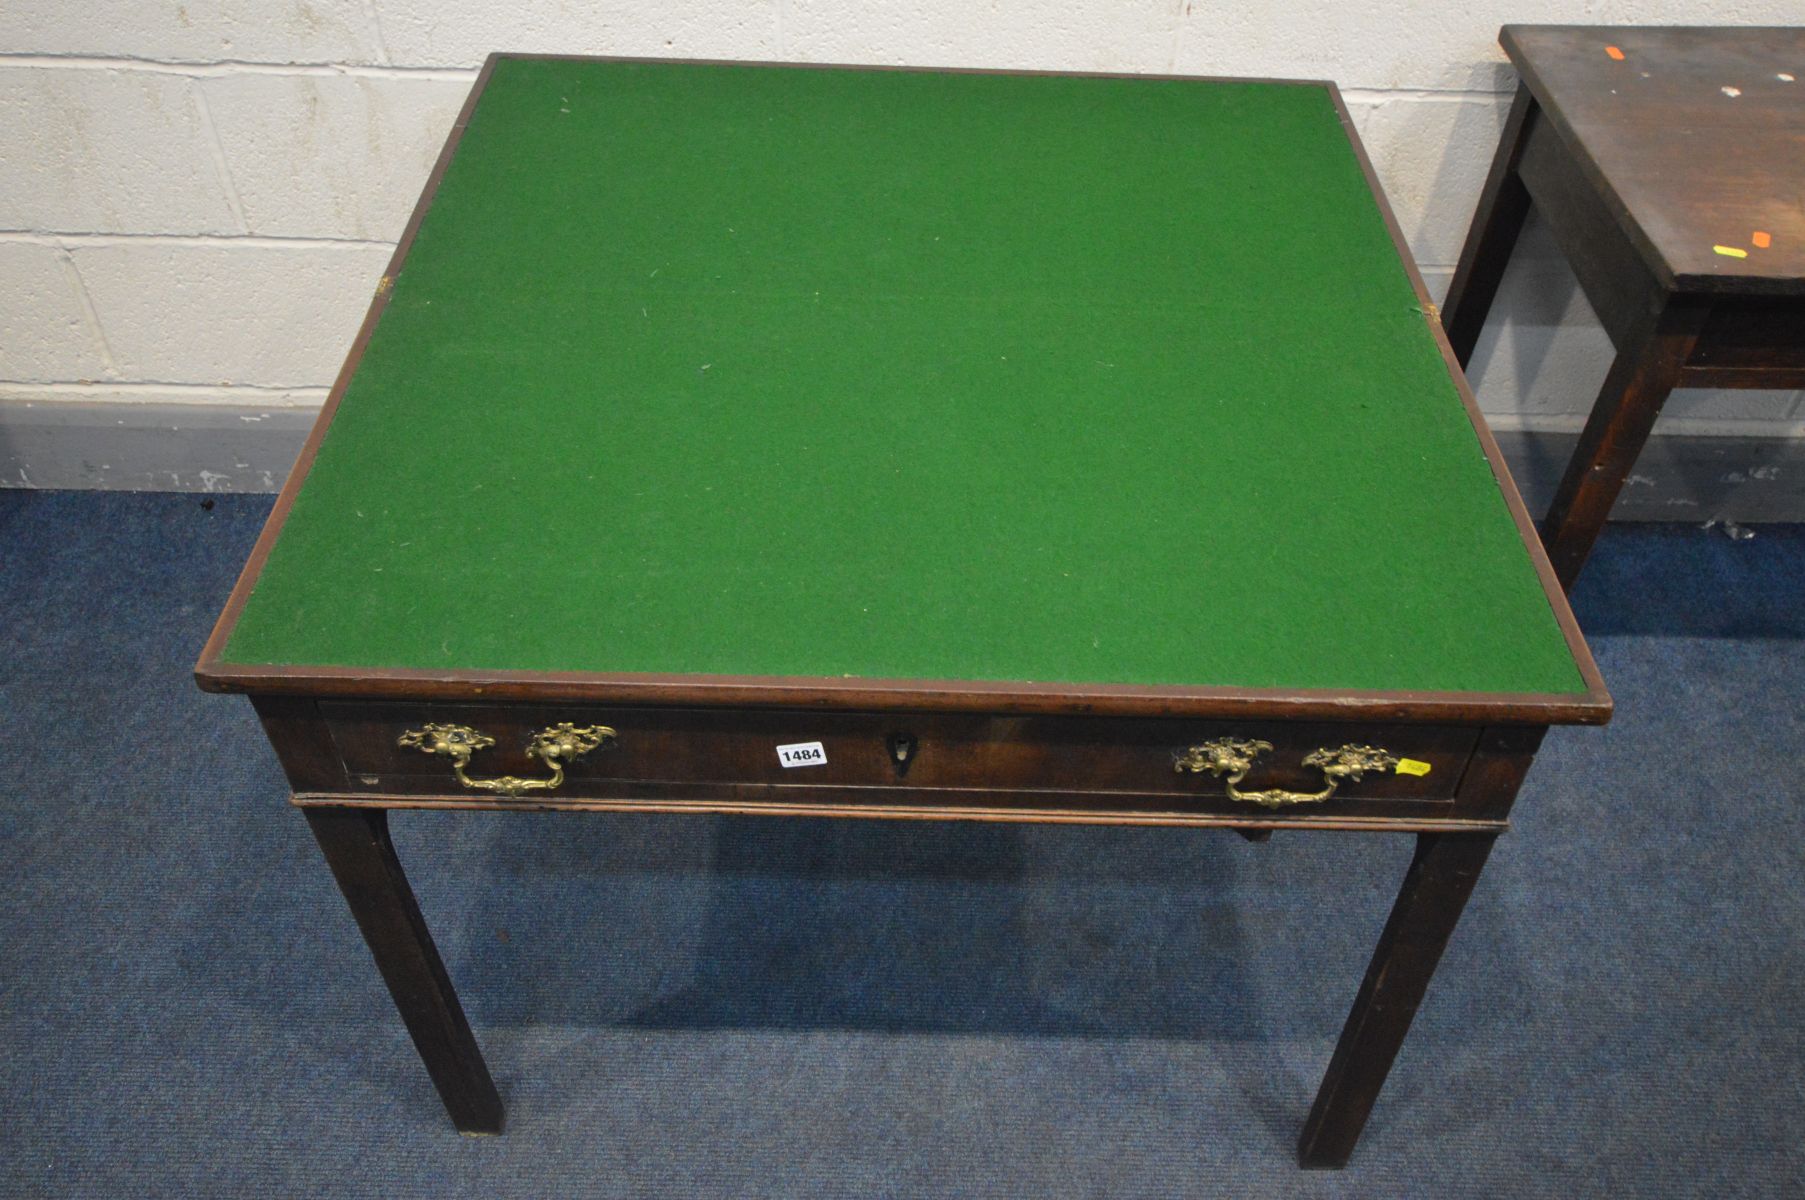 A GEORGIAN MAHOGANY CARD TABLE, the fold over top revealing a green baize playing surface, with a - Image 3 of 4